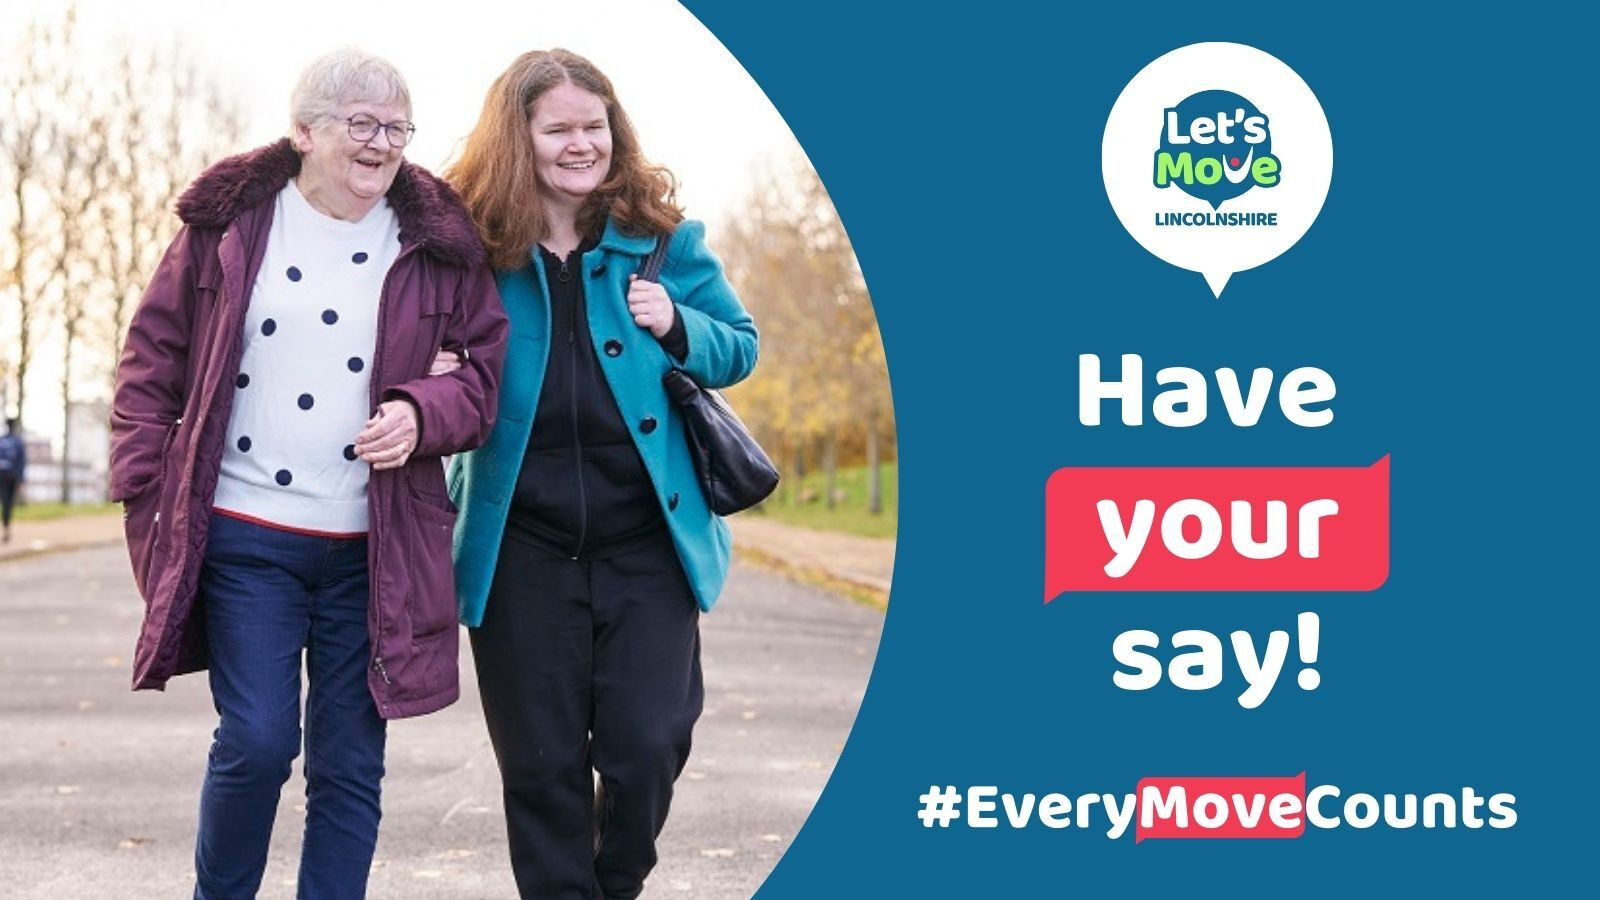 Help shape physical activity across Lincolnshire